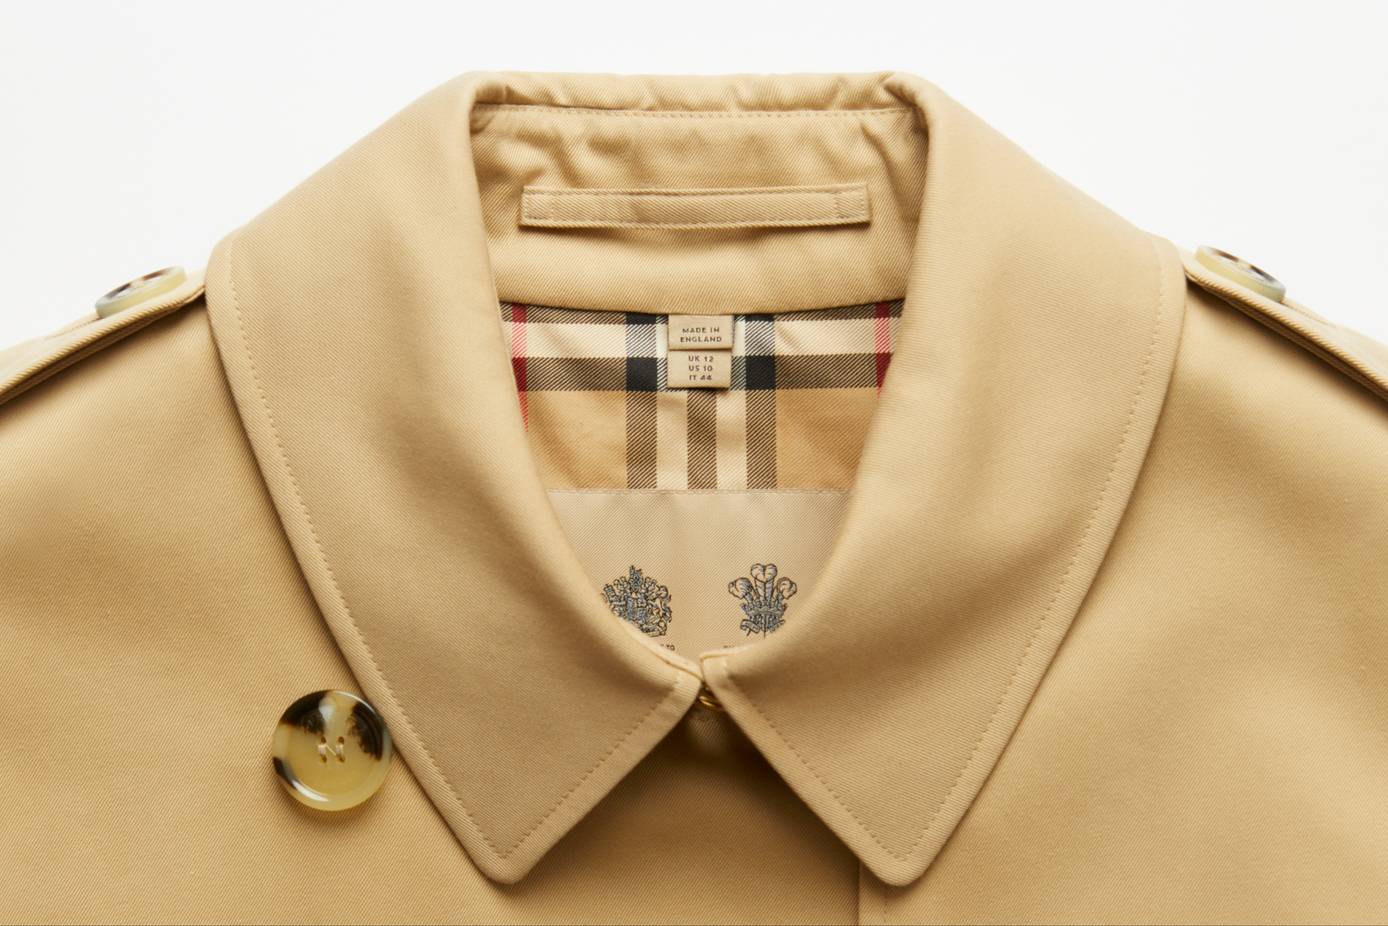 Are Burberry clothes worth it? – LINVELLES